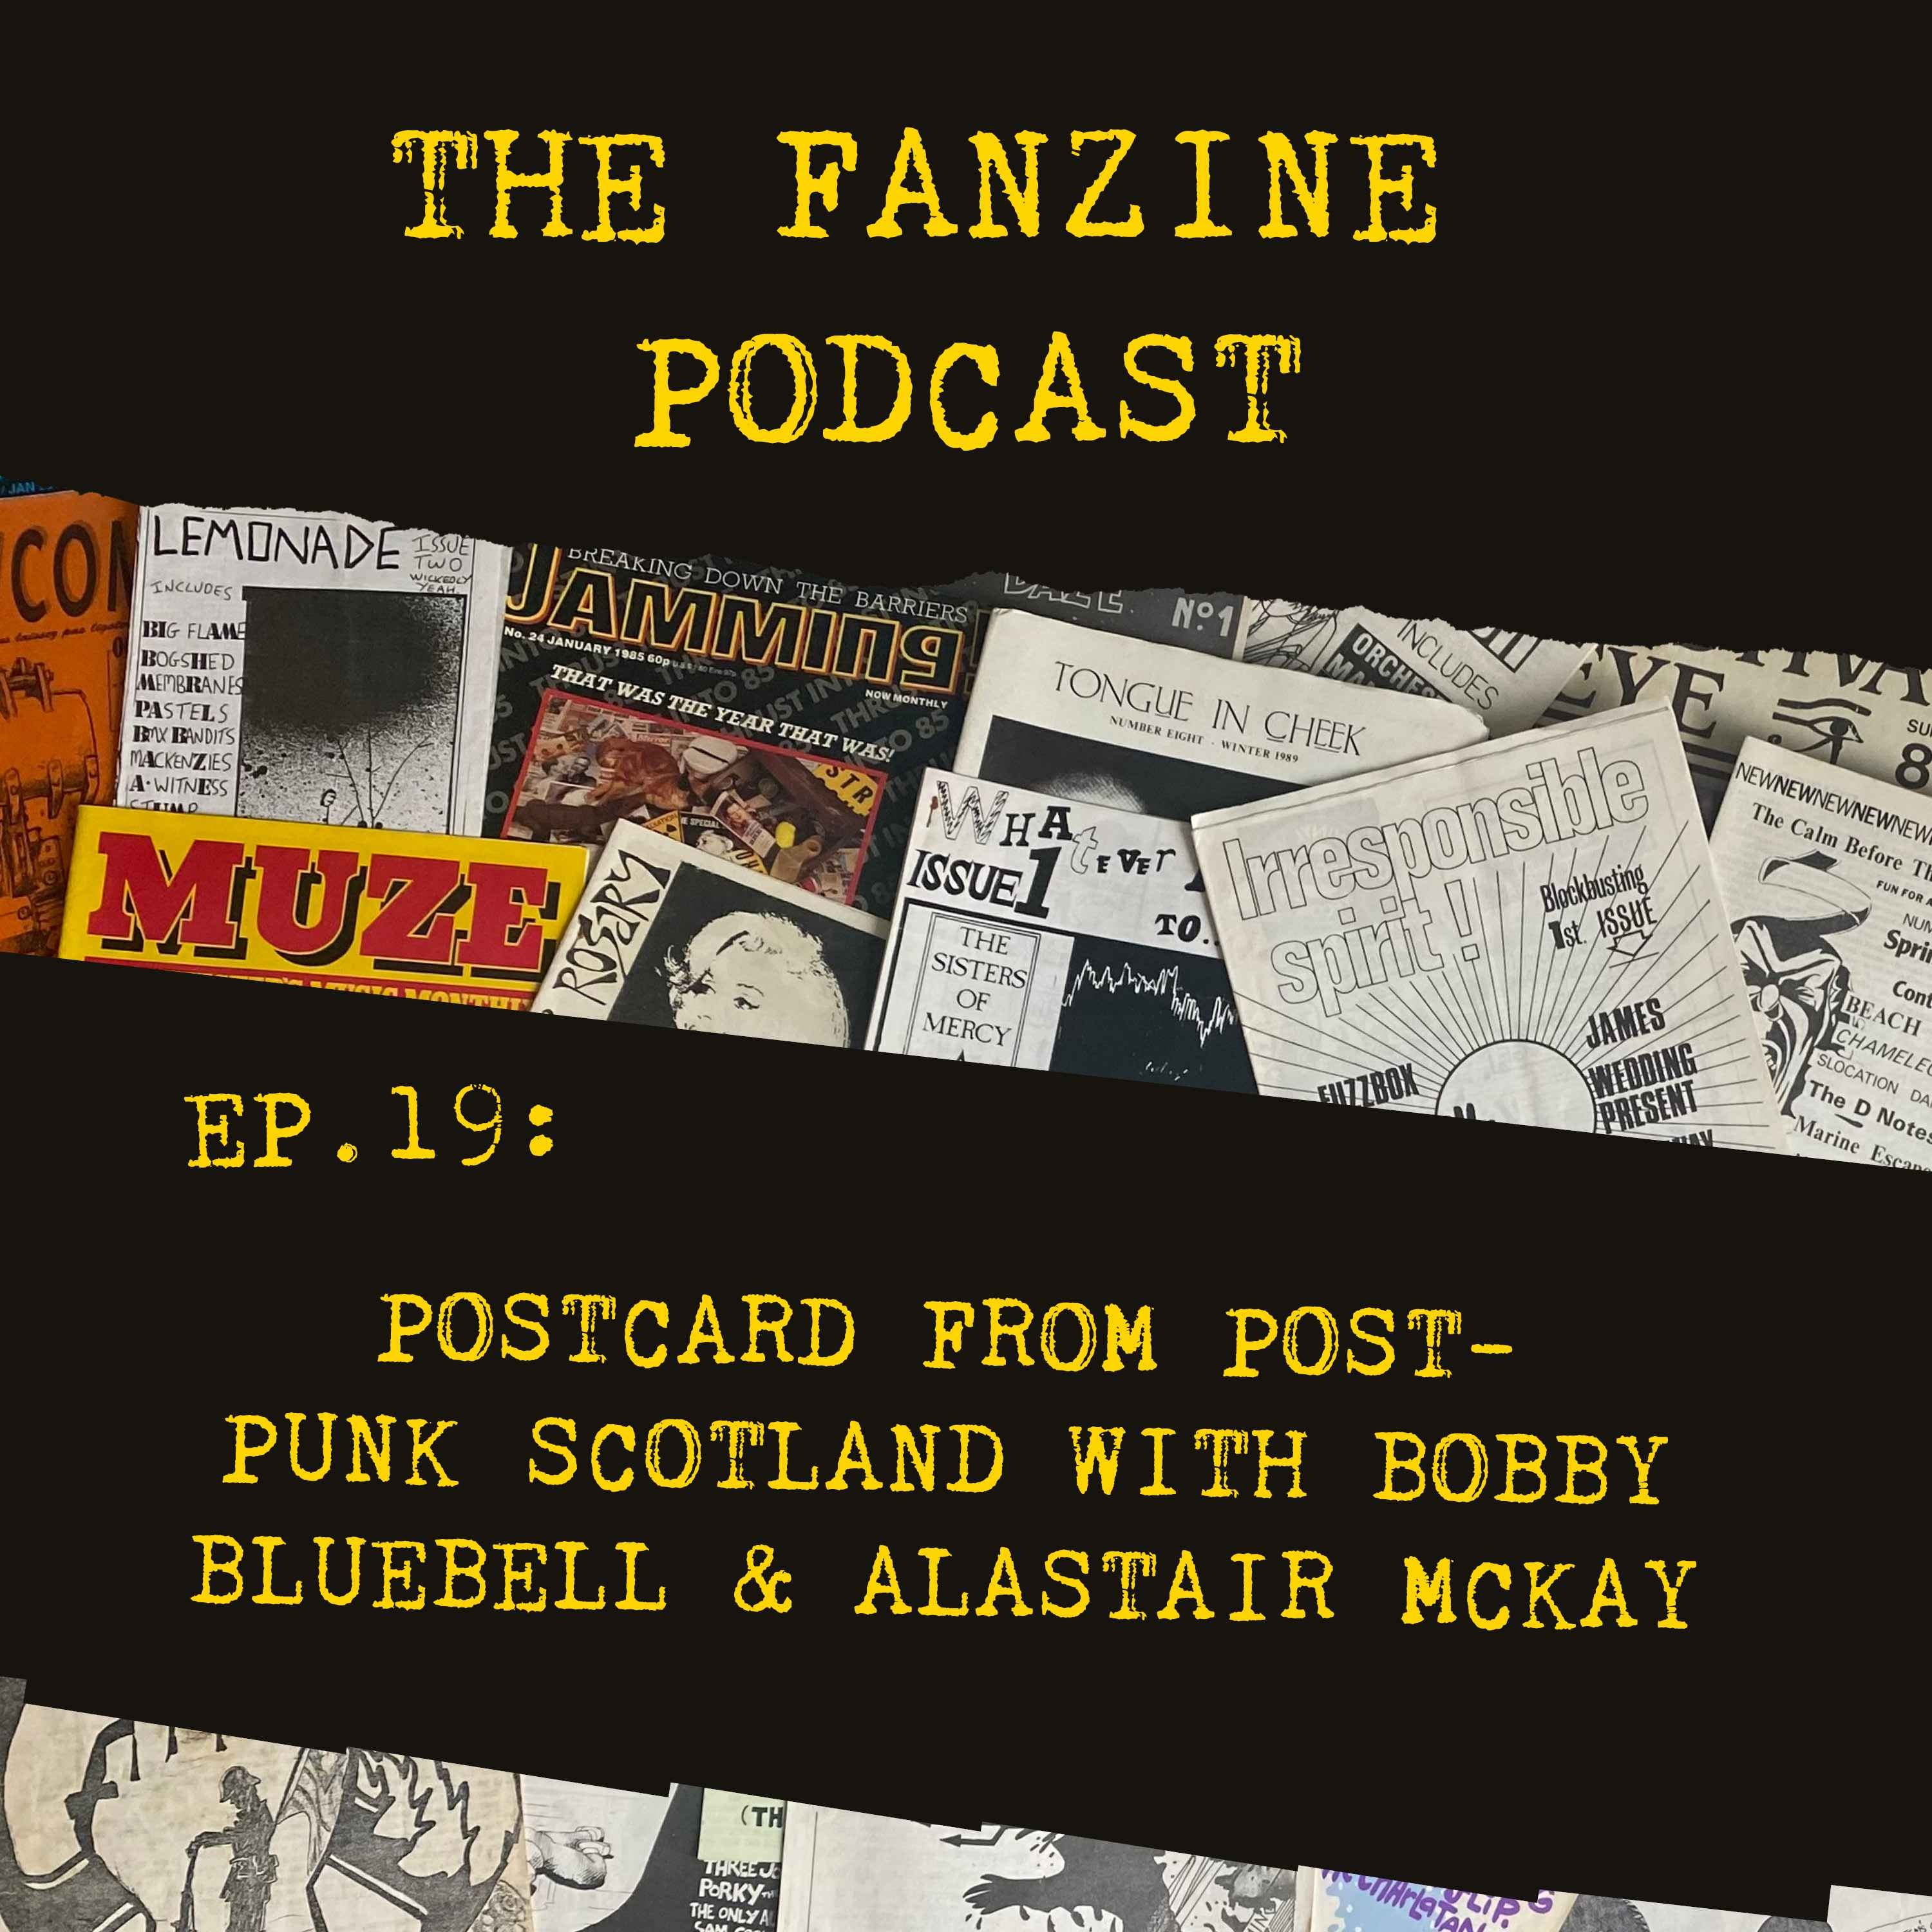 Ep. 19: Postcard from Post-Punk Scotland with Bobby Bluebell & Alastair McKay